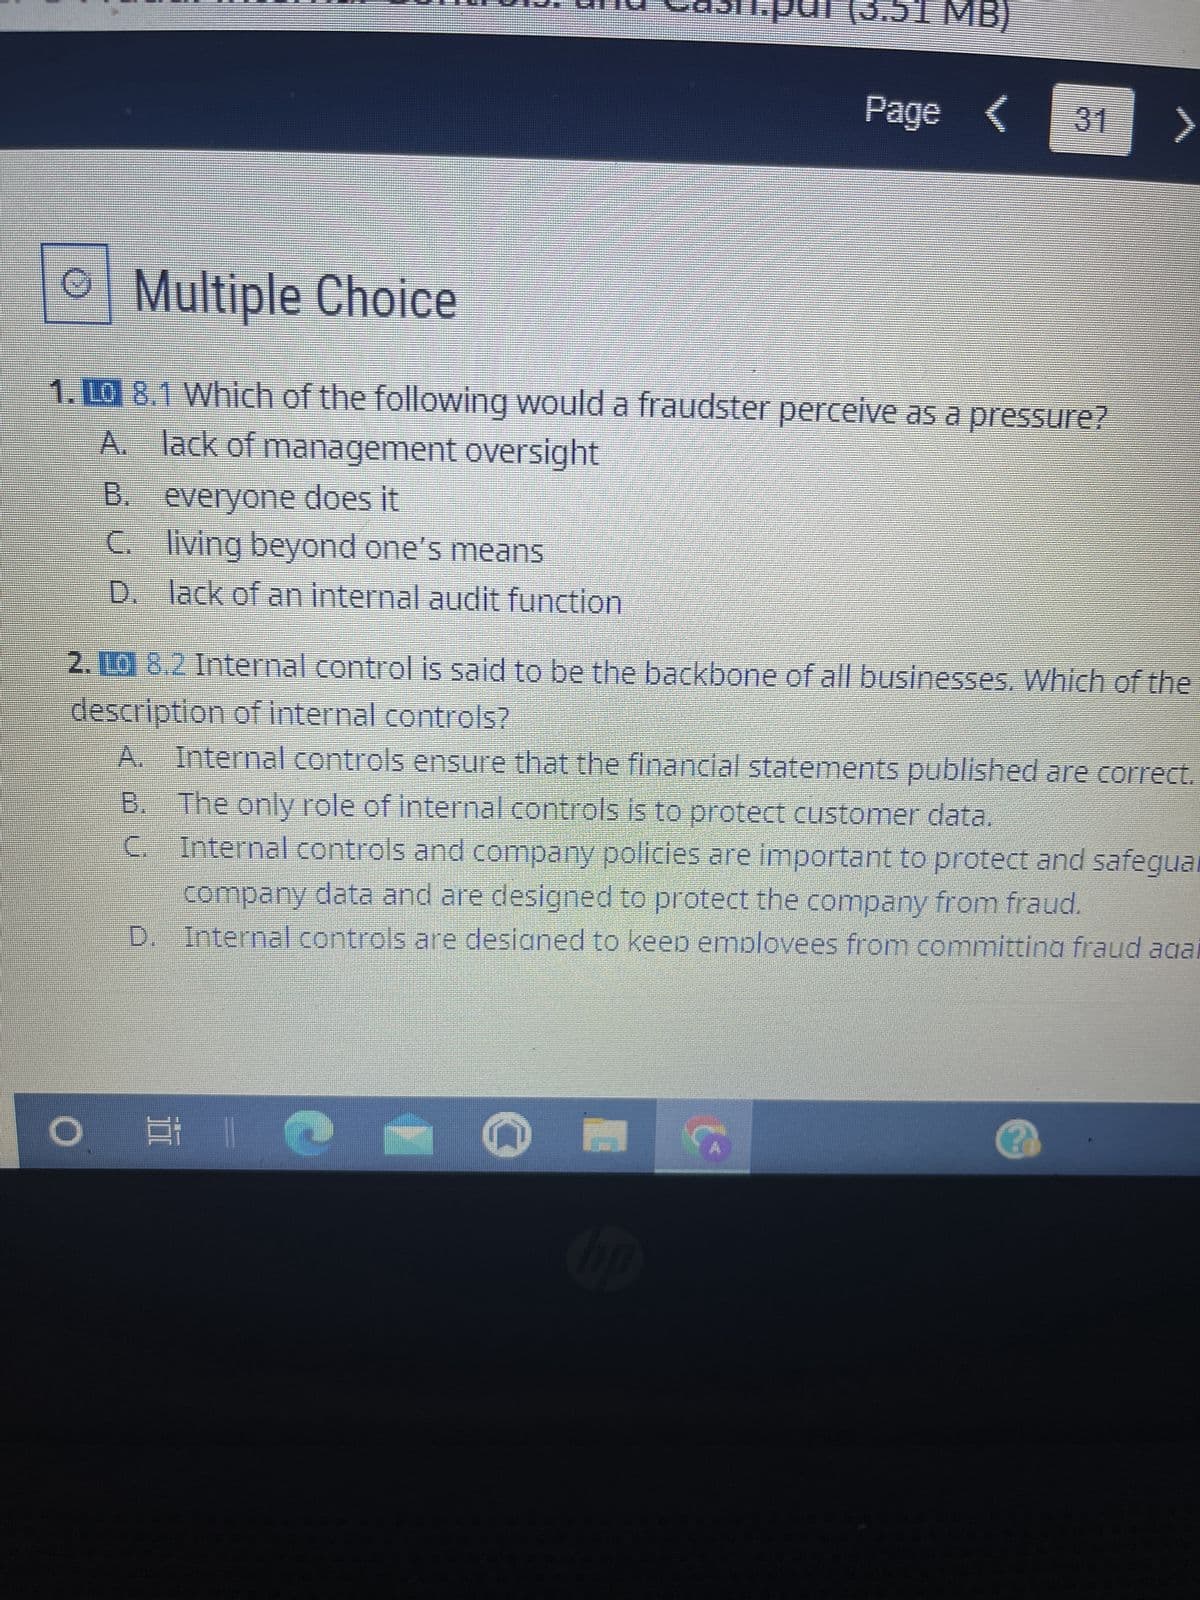 G
Multiple Choice
1. Lo 8.1 Which of the following would a fraudster perceive as a pressure?
A. lack of management oversight
B. everyone does it
C.
living beyond one's means
D. lack of an internal audit function
O
(3.51 MB)
2.10 8.2 Internal control is said to be the backbone of all businesses. Which of the
description of internal controls?
A. Internal controls ensure that the financial statements published are correct.
B.
The only role of internal controls is to protect customer data.
Internal controls and company policies are important to protect and safeguar
company data and are designed to protect the company from fraud.
D. Internal controls are designed to keep emplovees from committina fraud agai
C.
Page < 31 >
31 1 2 -